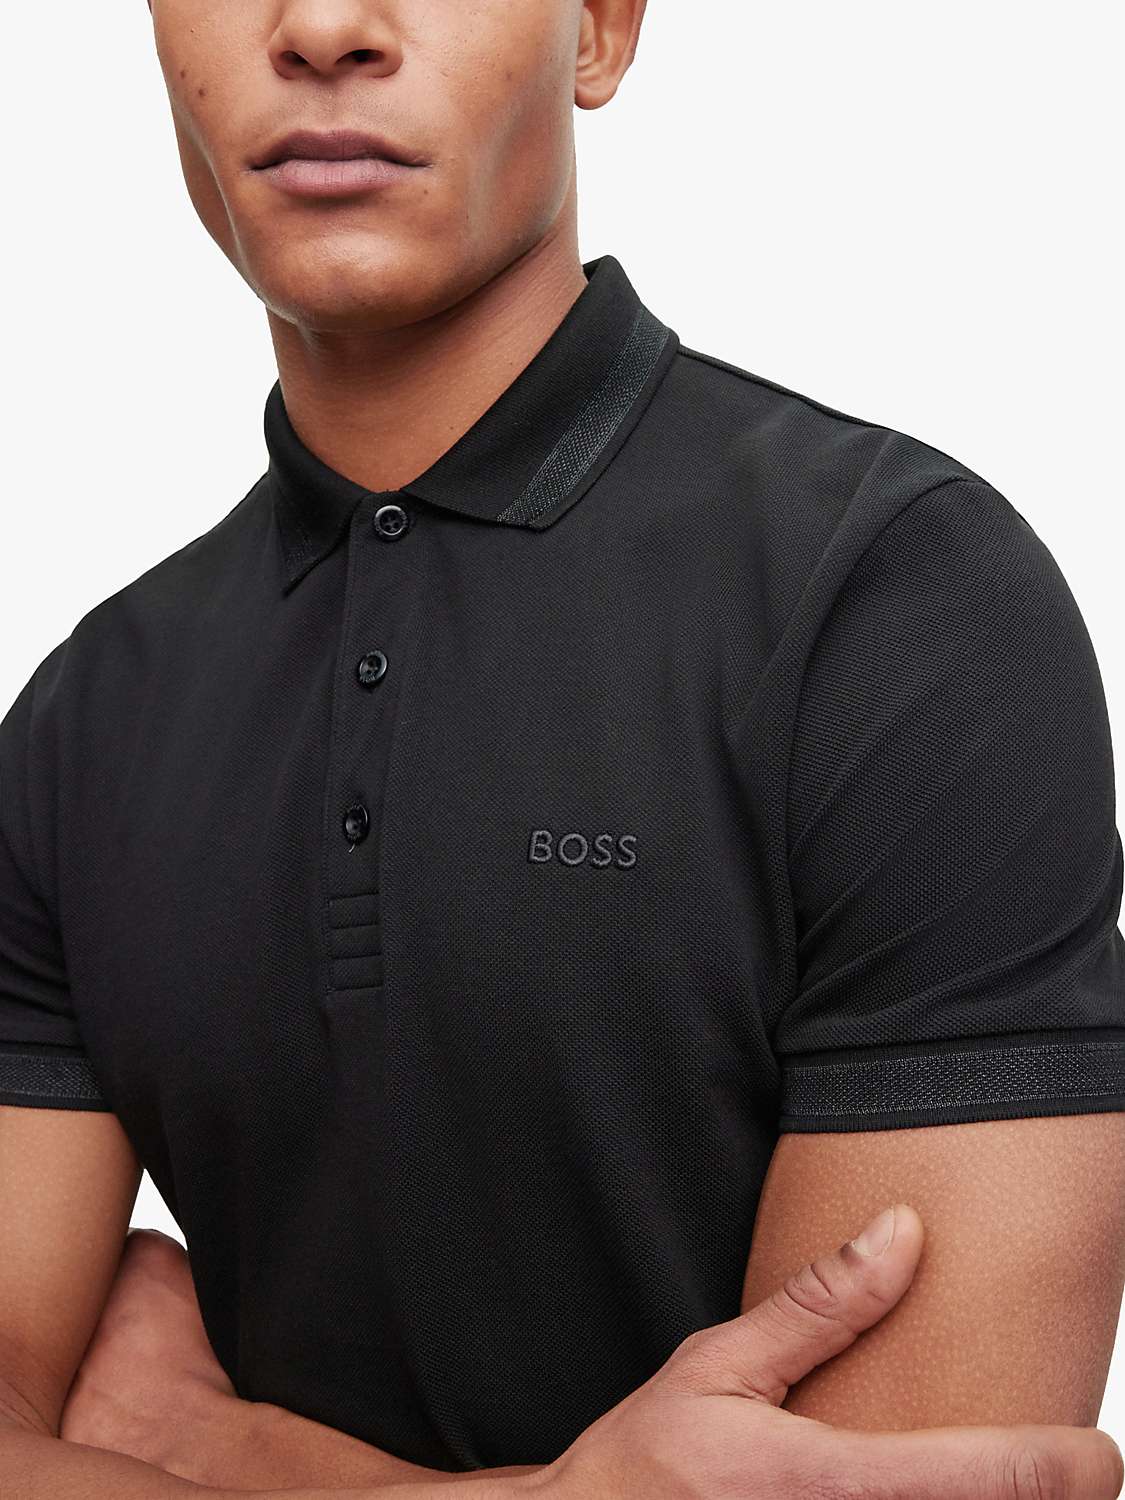 sund fornuft Specialist At passe BOSS Paddy Short Sleeve Polo Shirt, Black at John Lewis & Partners